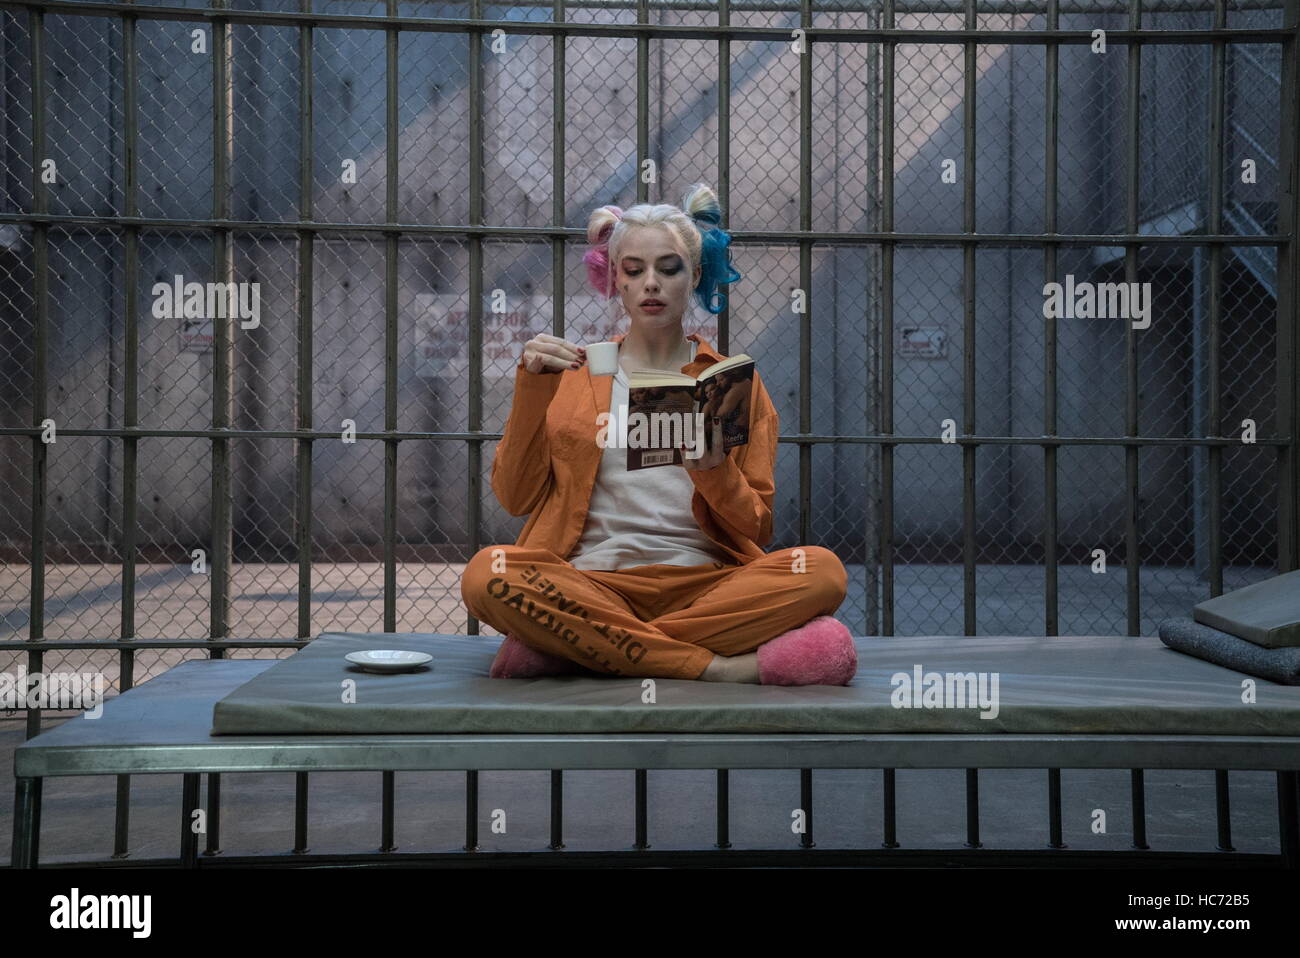 RELEASE DATE: August 5, 2016 TITLE: Suicide Squad STUDIO: Atlas Entertainment DIRECTOR: David Ayer PLOT: A secret government agency recruits imprisoned supervillains to execute dangerous black ops missions in exchange for clemency STARRING: Margot Robbie as Harley Quinn (Credit Image: c Atlas Entertainment/Entertainment Pictures/) Stock Photo